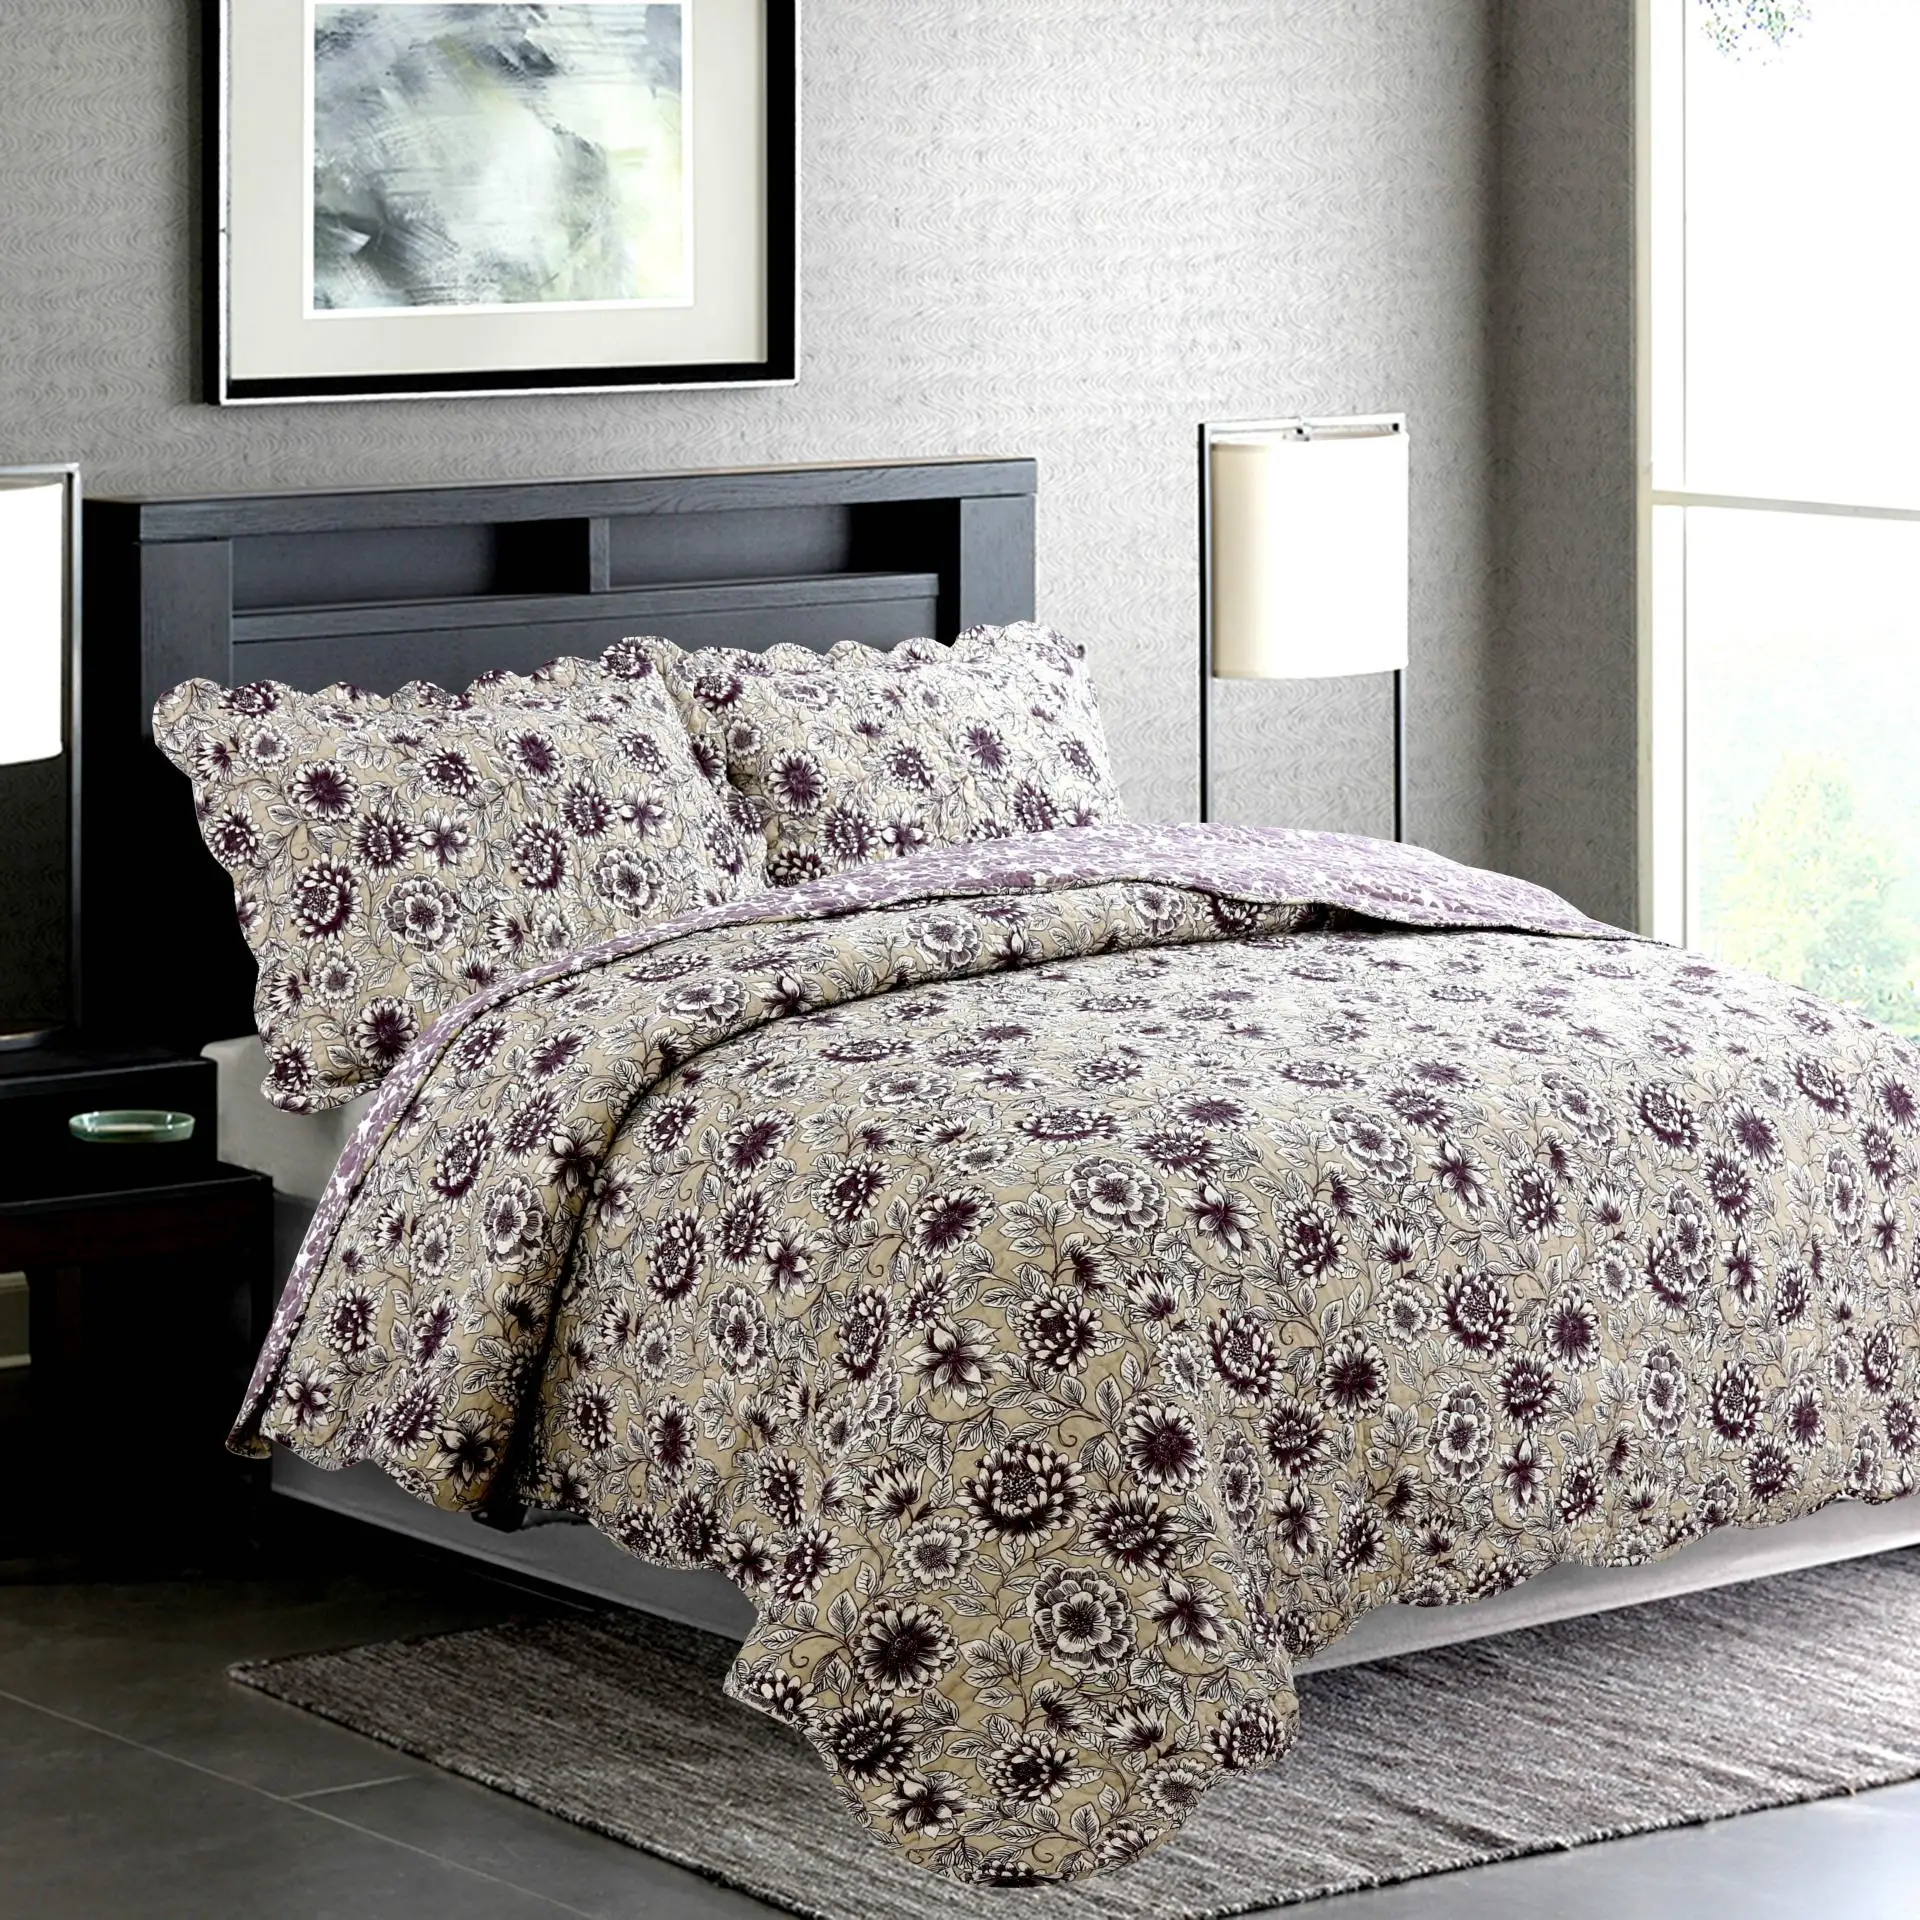 

Vibrant Blossom Floral printed 100% Cotton Reversible Bedspread set, 3Pieces Queen size Bedspread Coverlet Pillow shams